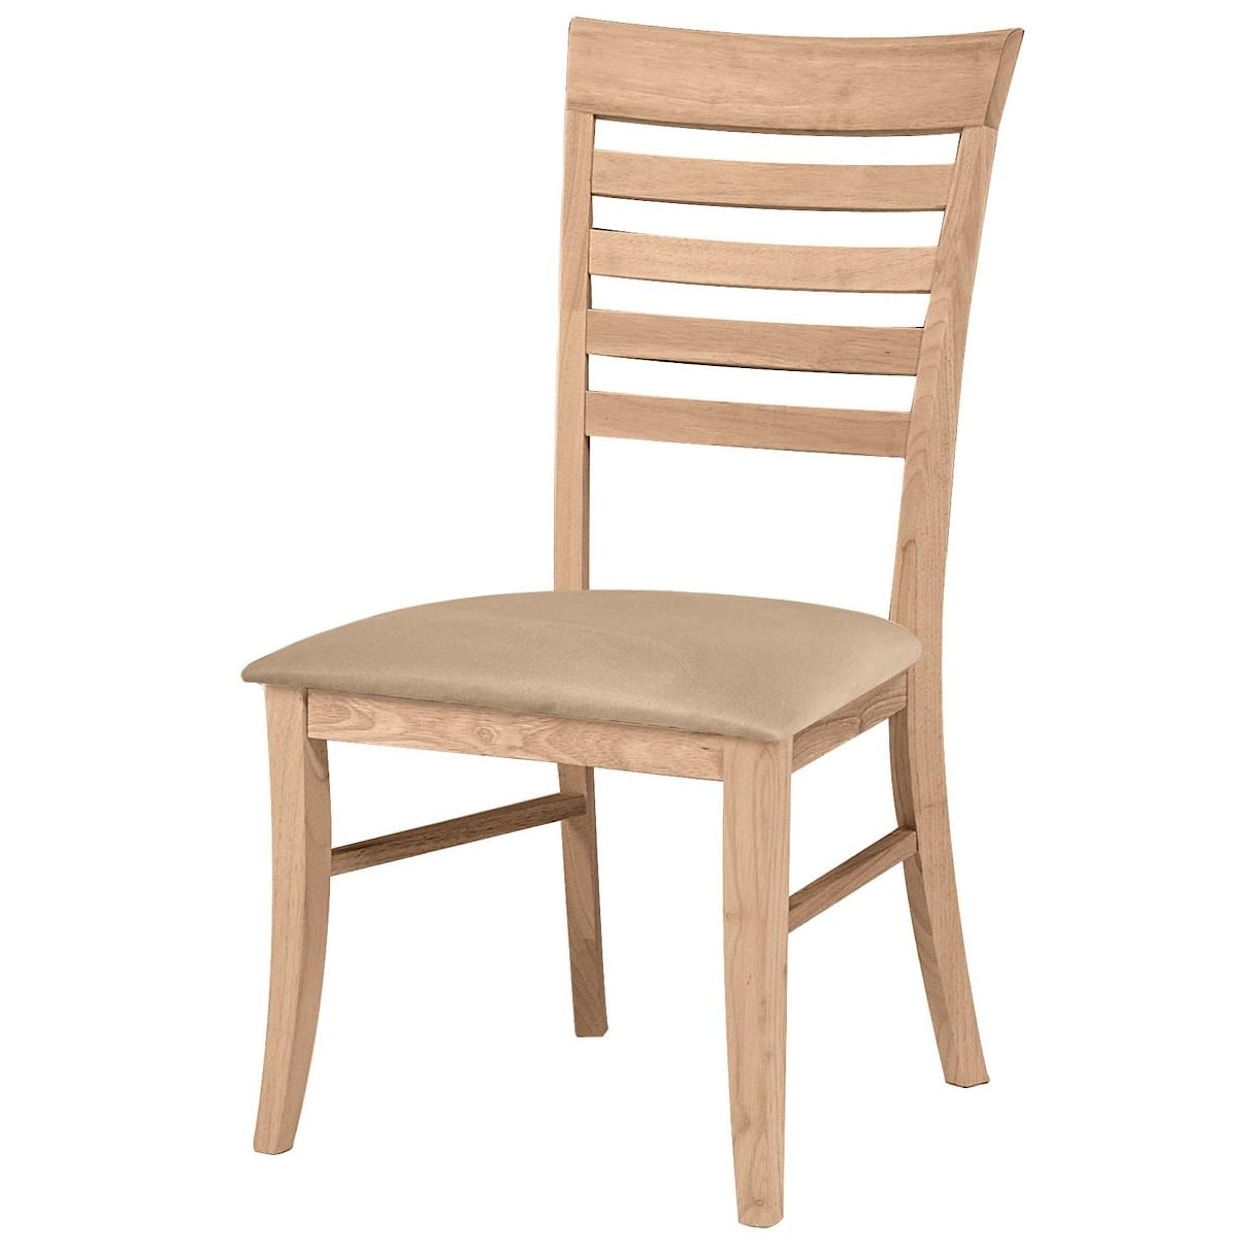 John Thomas SELECT Dining Room Roma Chair with Seat Cushion